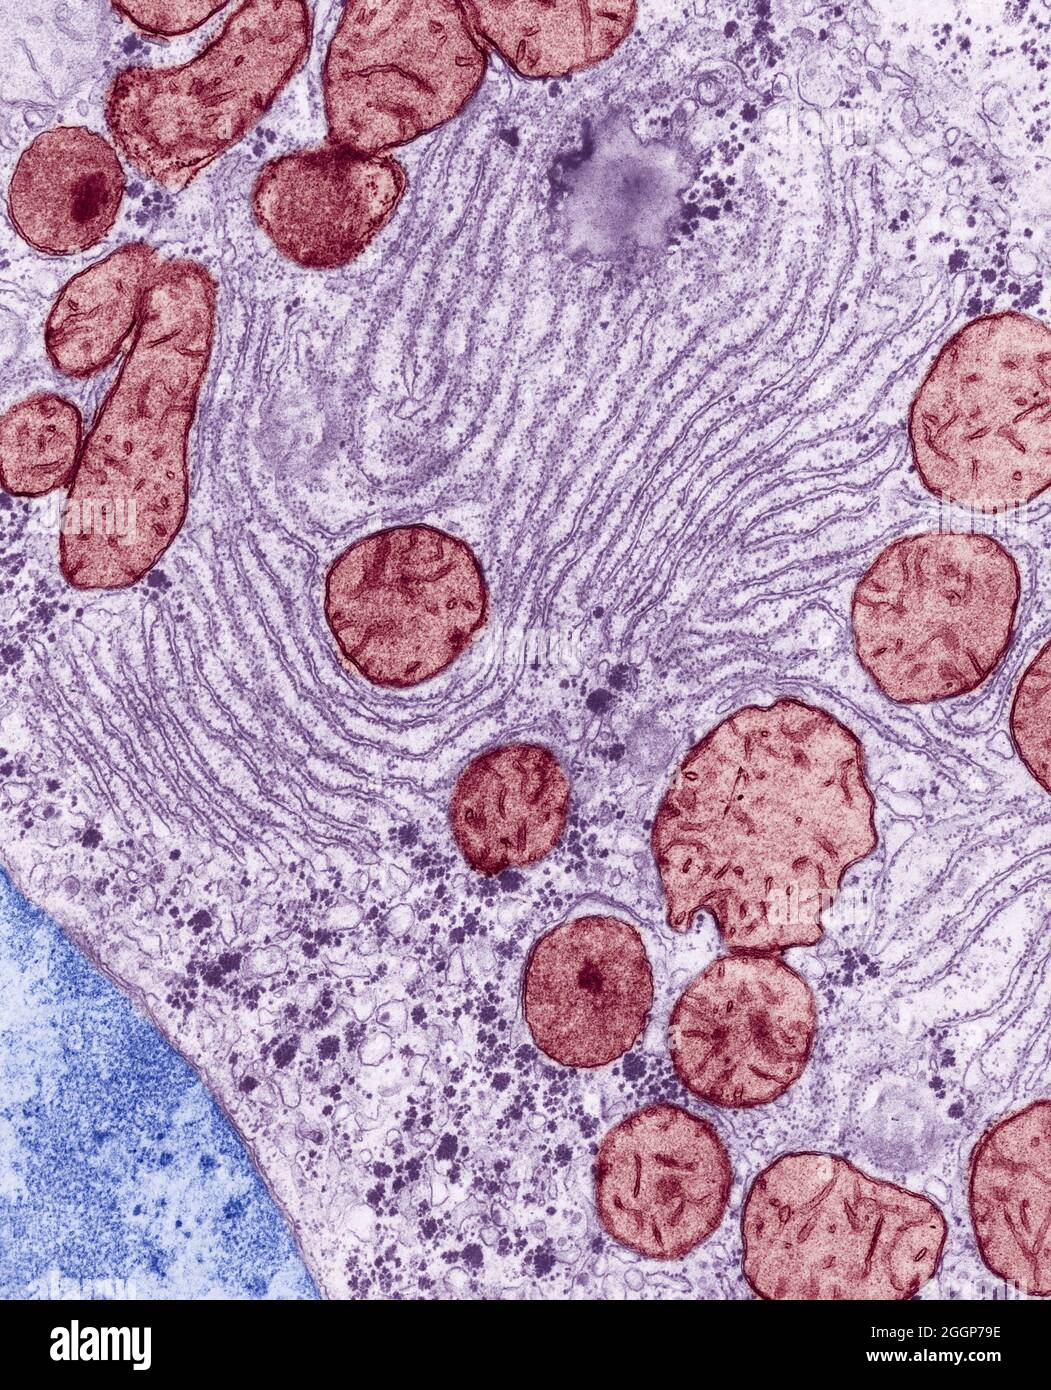 Colorized transmission Electron Micrograph (TEM) of endoplasmic reticulum and mitochondria in the liver of a rat. Stock Photo